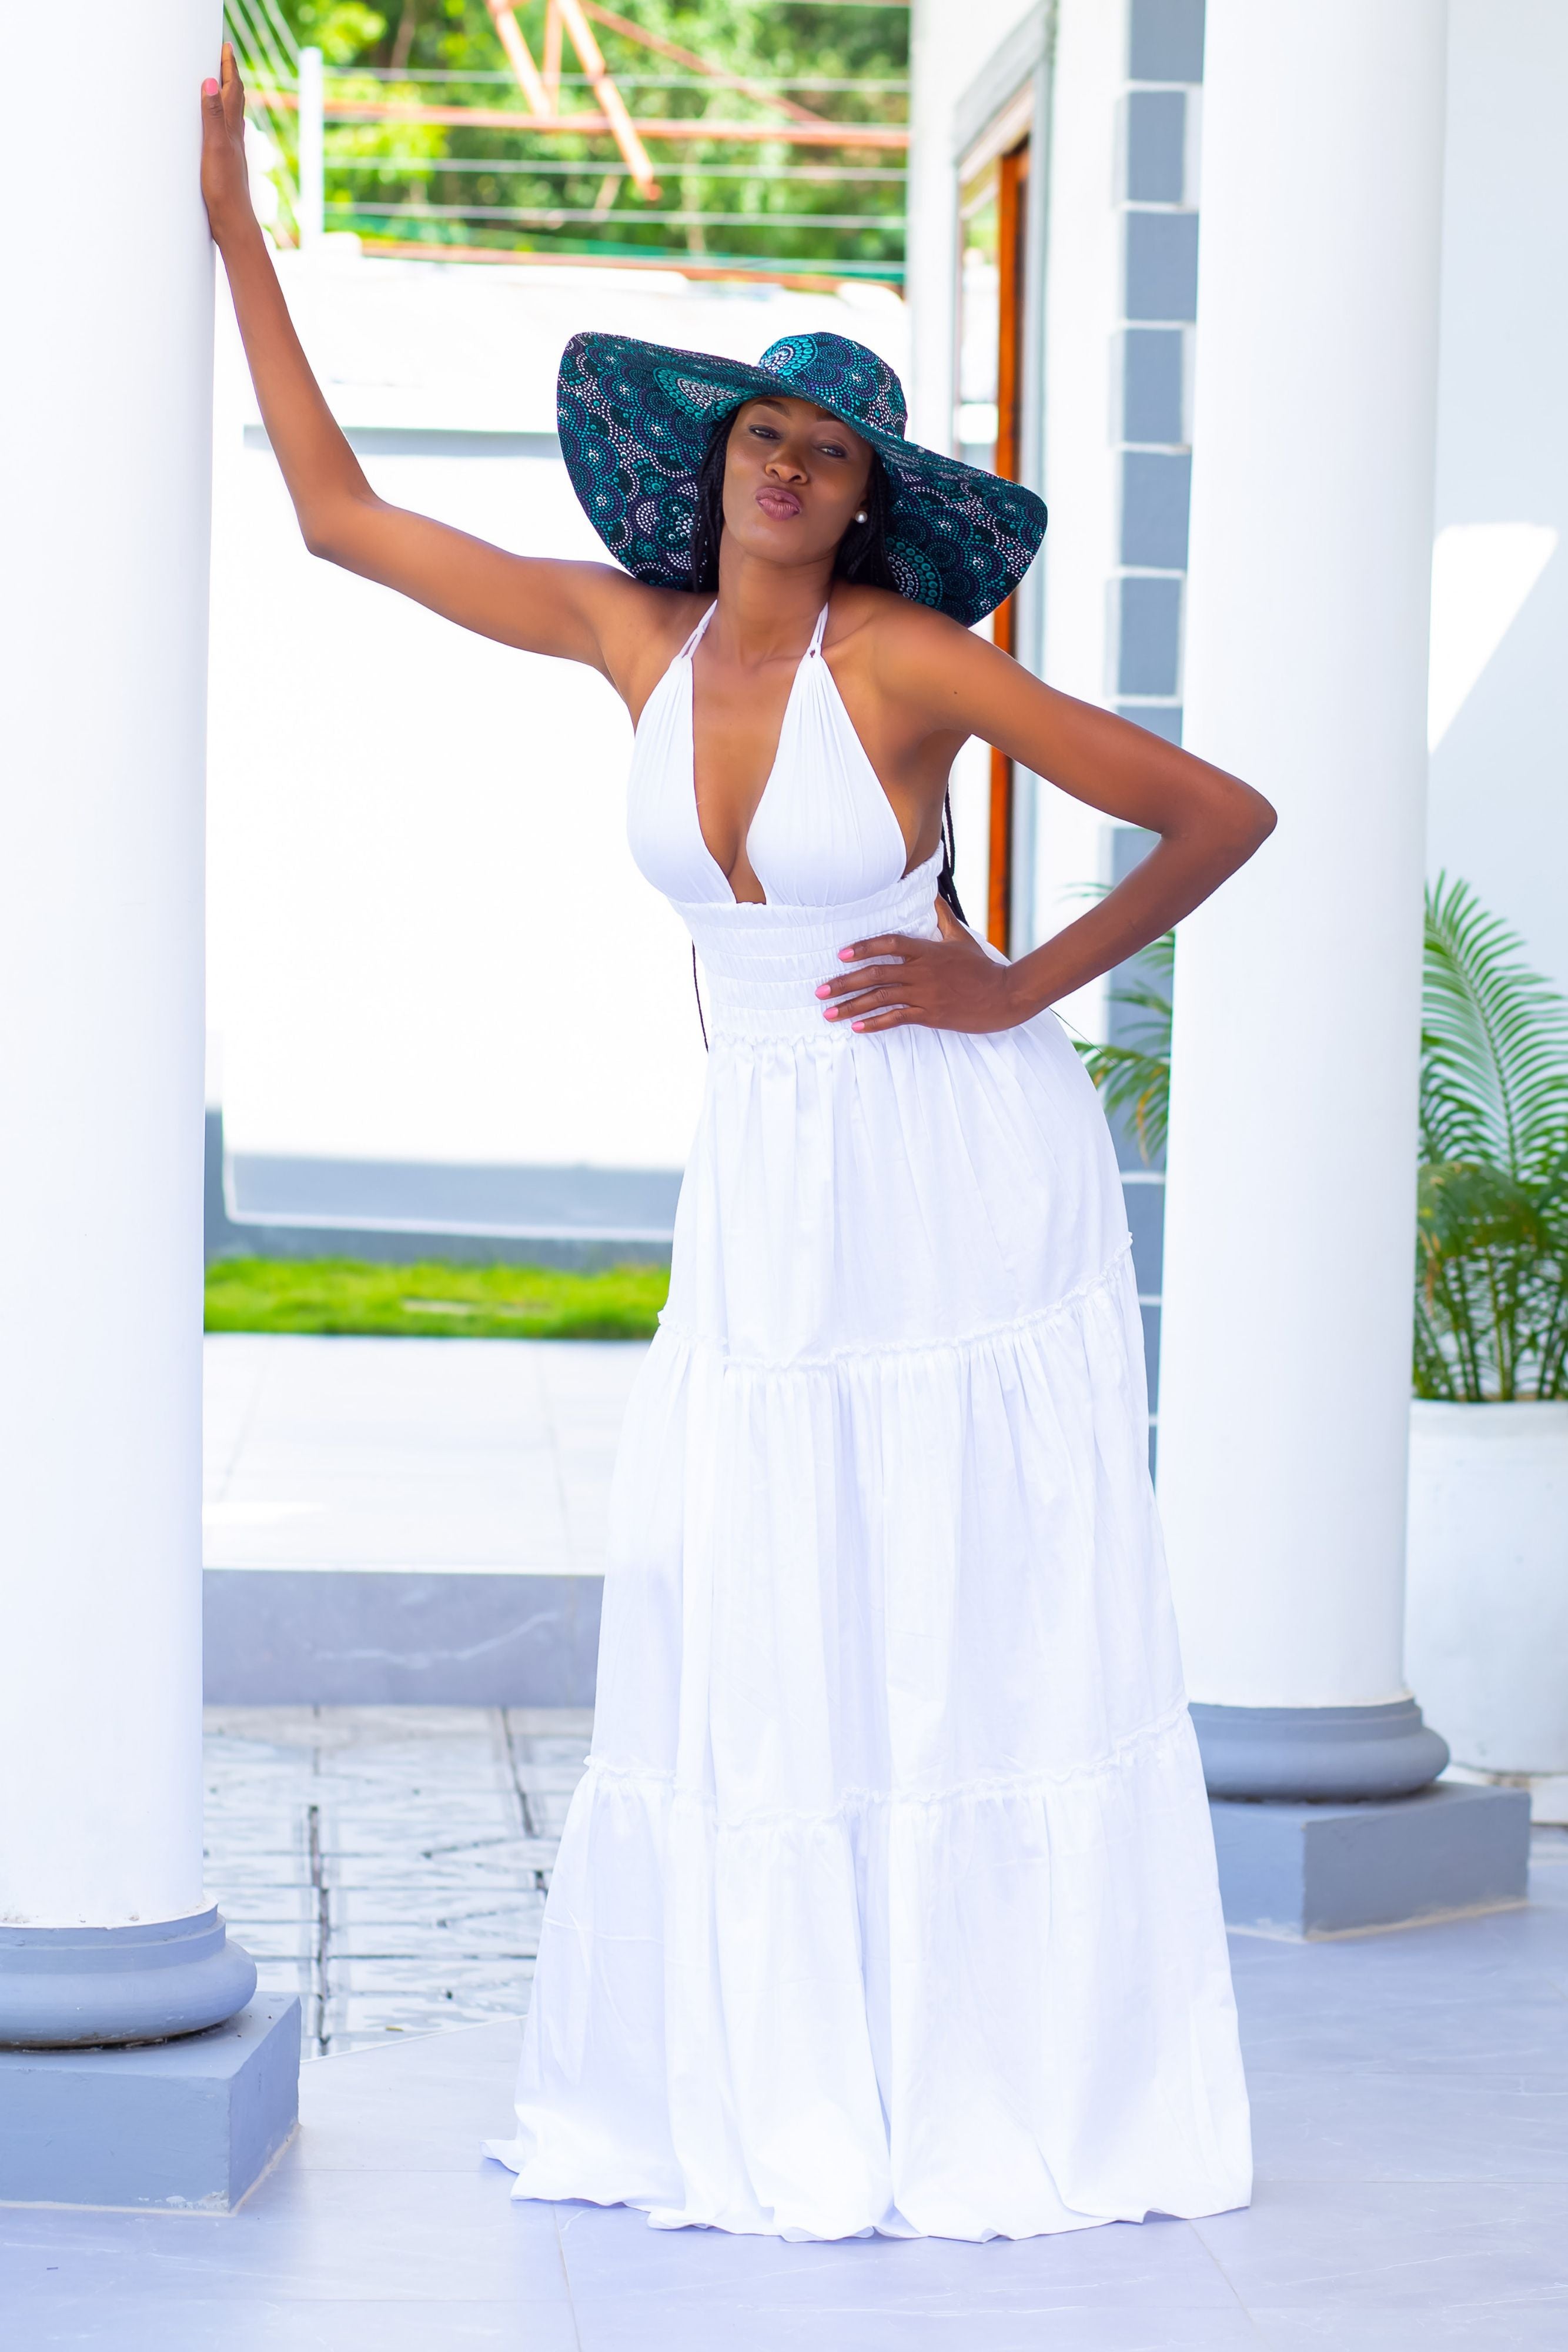 Jollo Tausi Modern African Hat: let comfort and style give you the best shade.